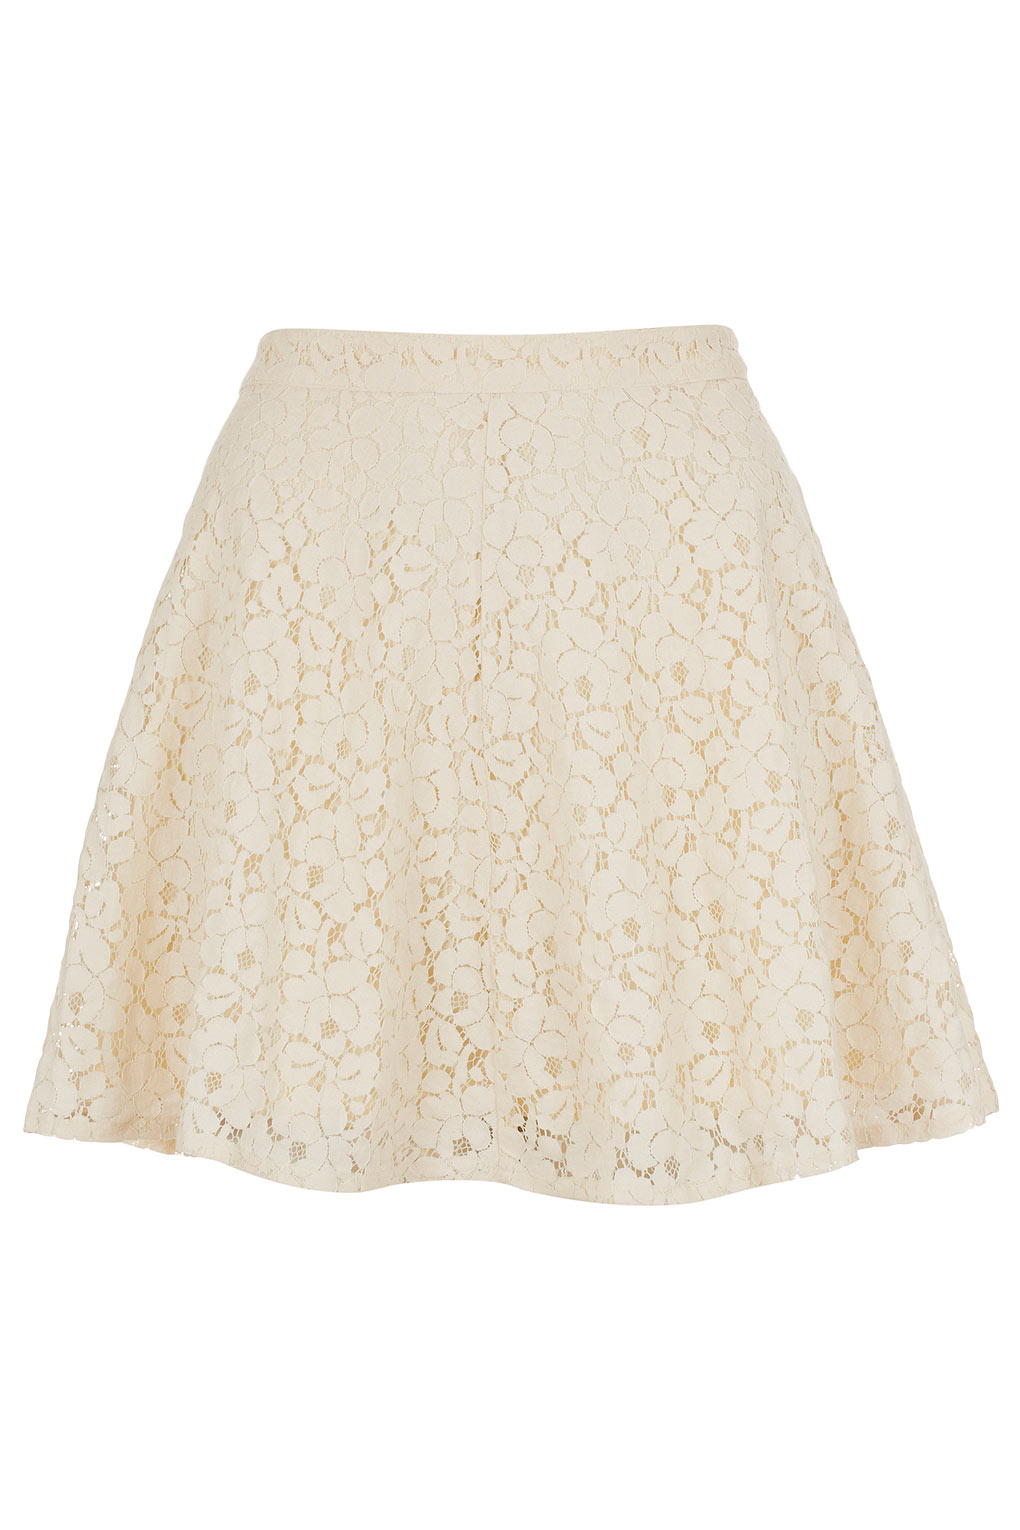 Topshop Cream Lace Skater Skirt in Natural | Lyst